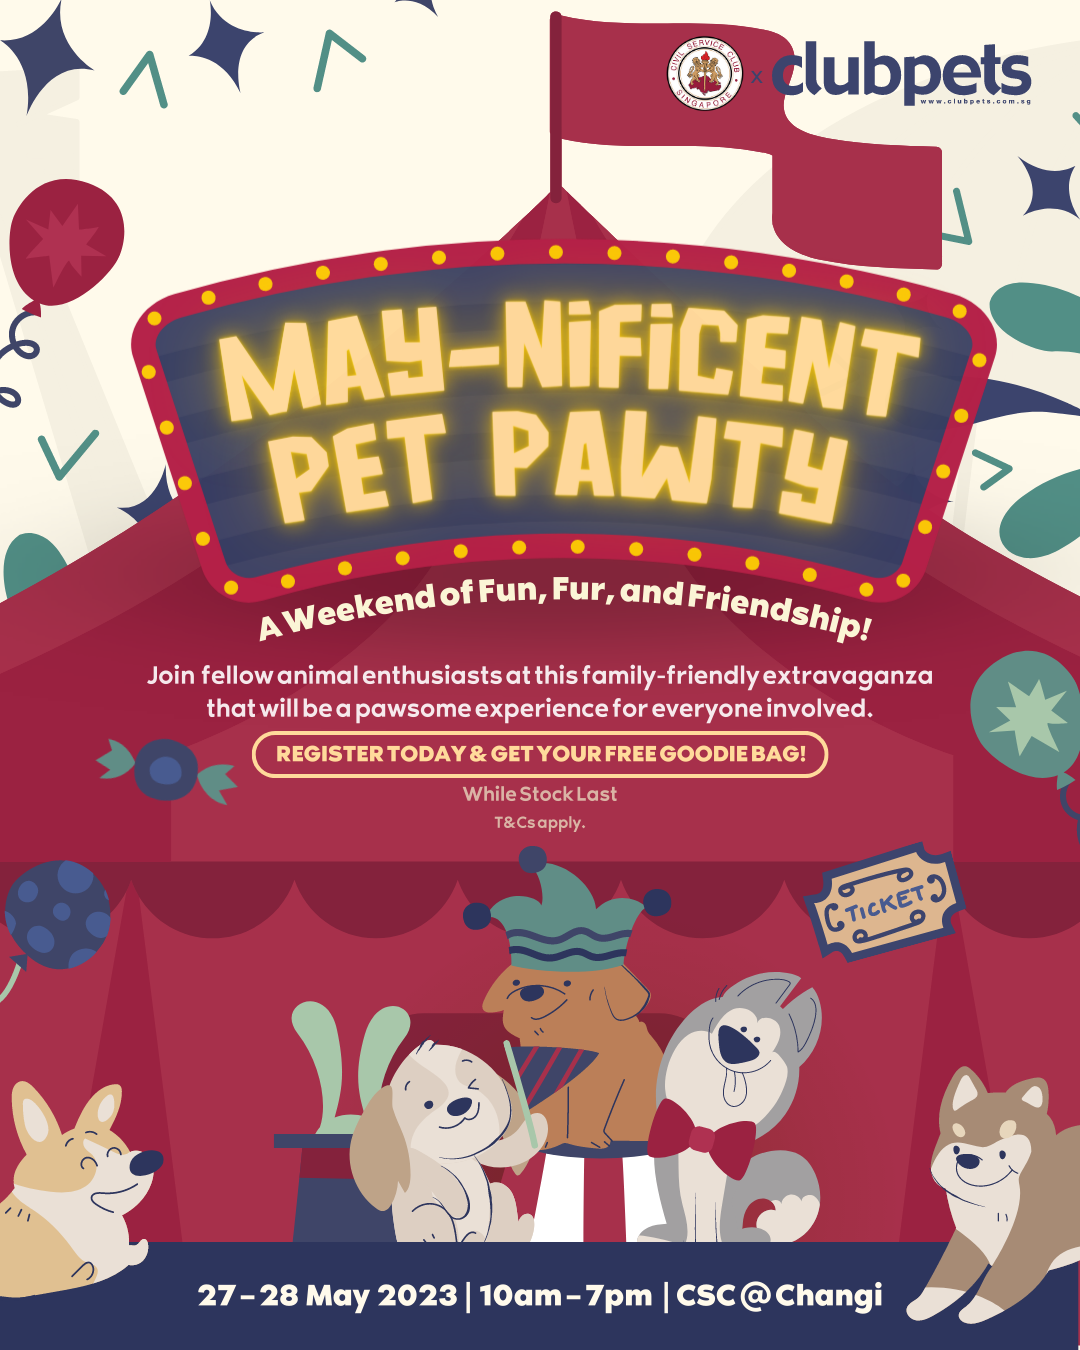 May-Nificent Pet Pawty at Civil Service Club @ Changi | Pet Events in Singapore 2023